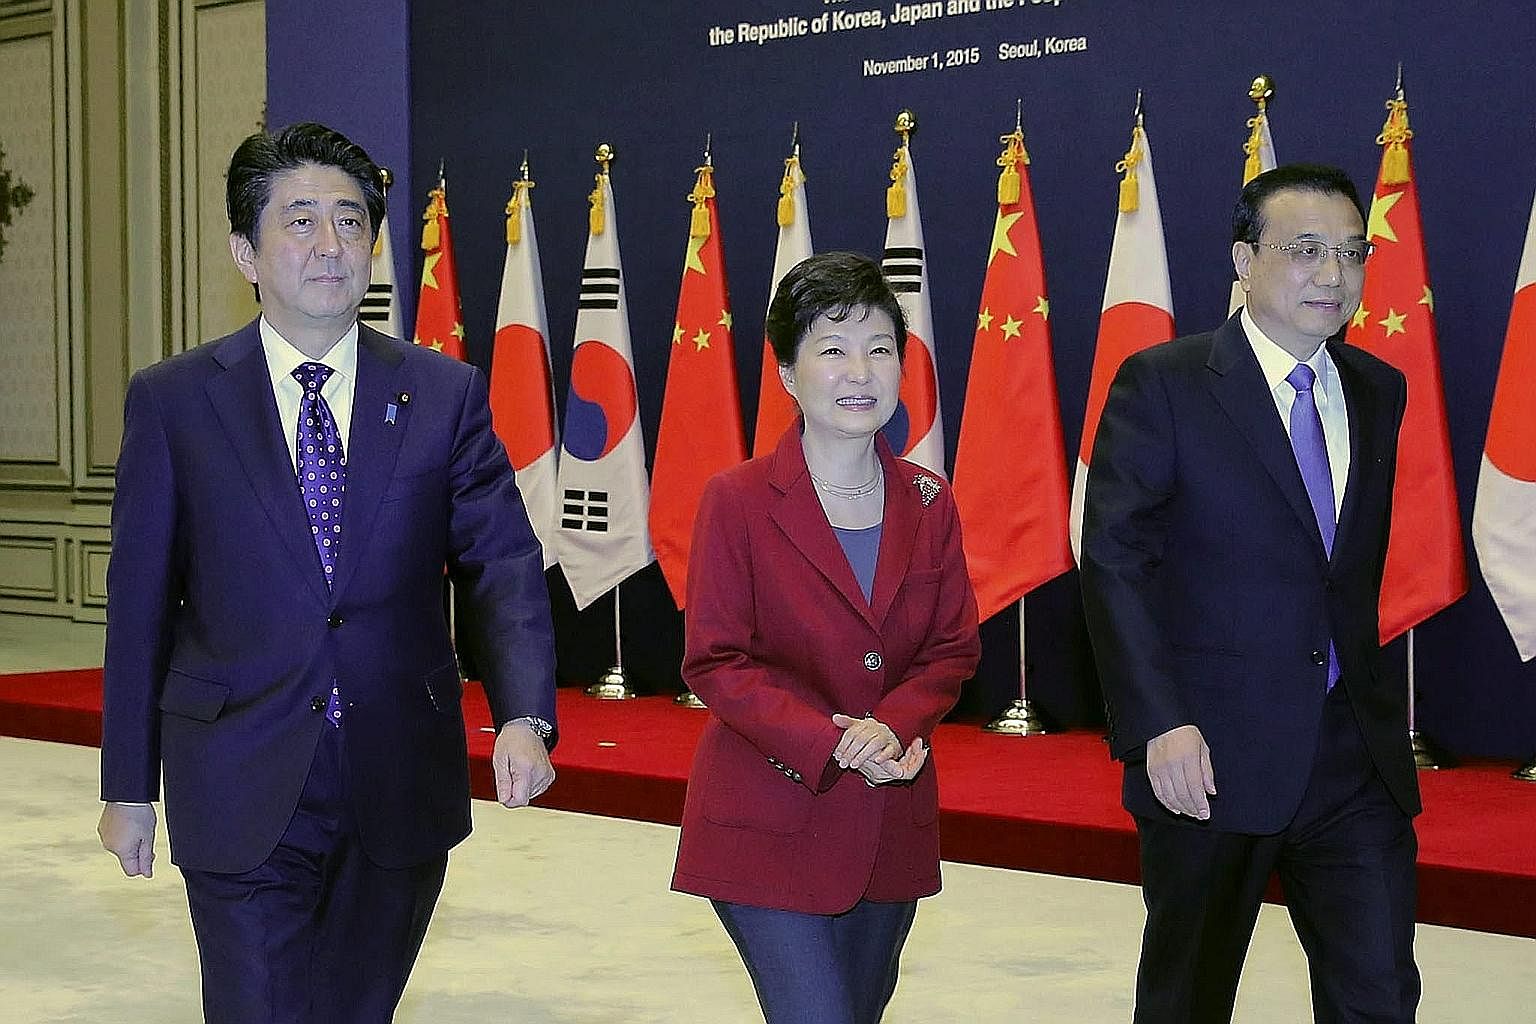 From left: Japanese Prime Minister Shinzo Abe, South Korean President Park Geun Hye and Chinese Premier Li Keqiang at the presidential office Cheong Wa Dae in Seoul, South Korea, on Sunday to hold a trilateral summit, the first such meeting among the